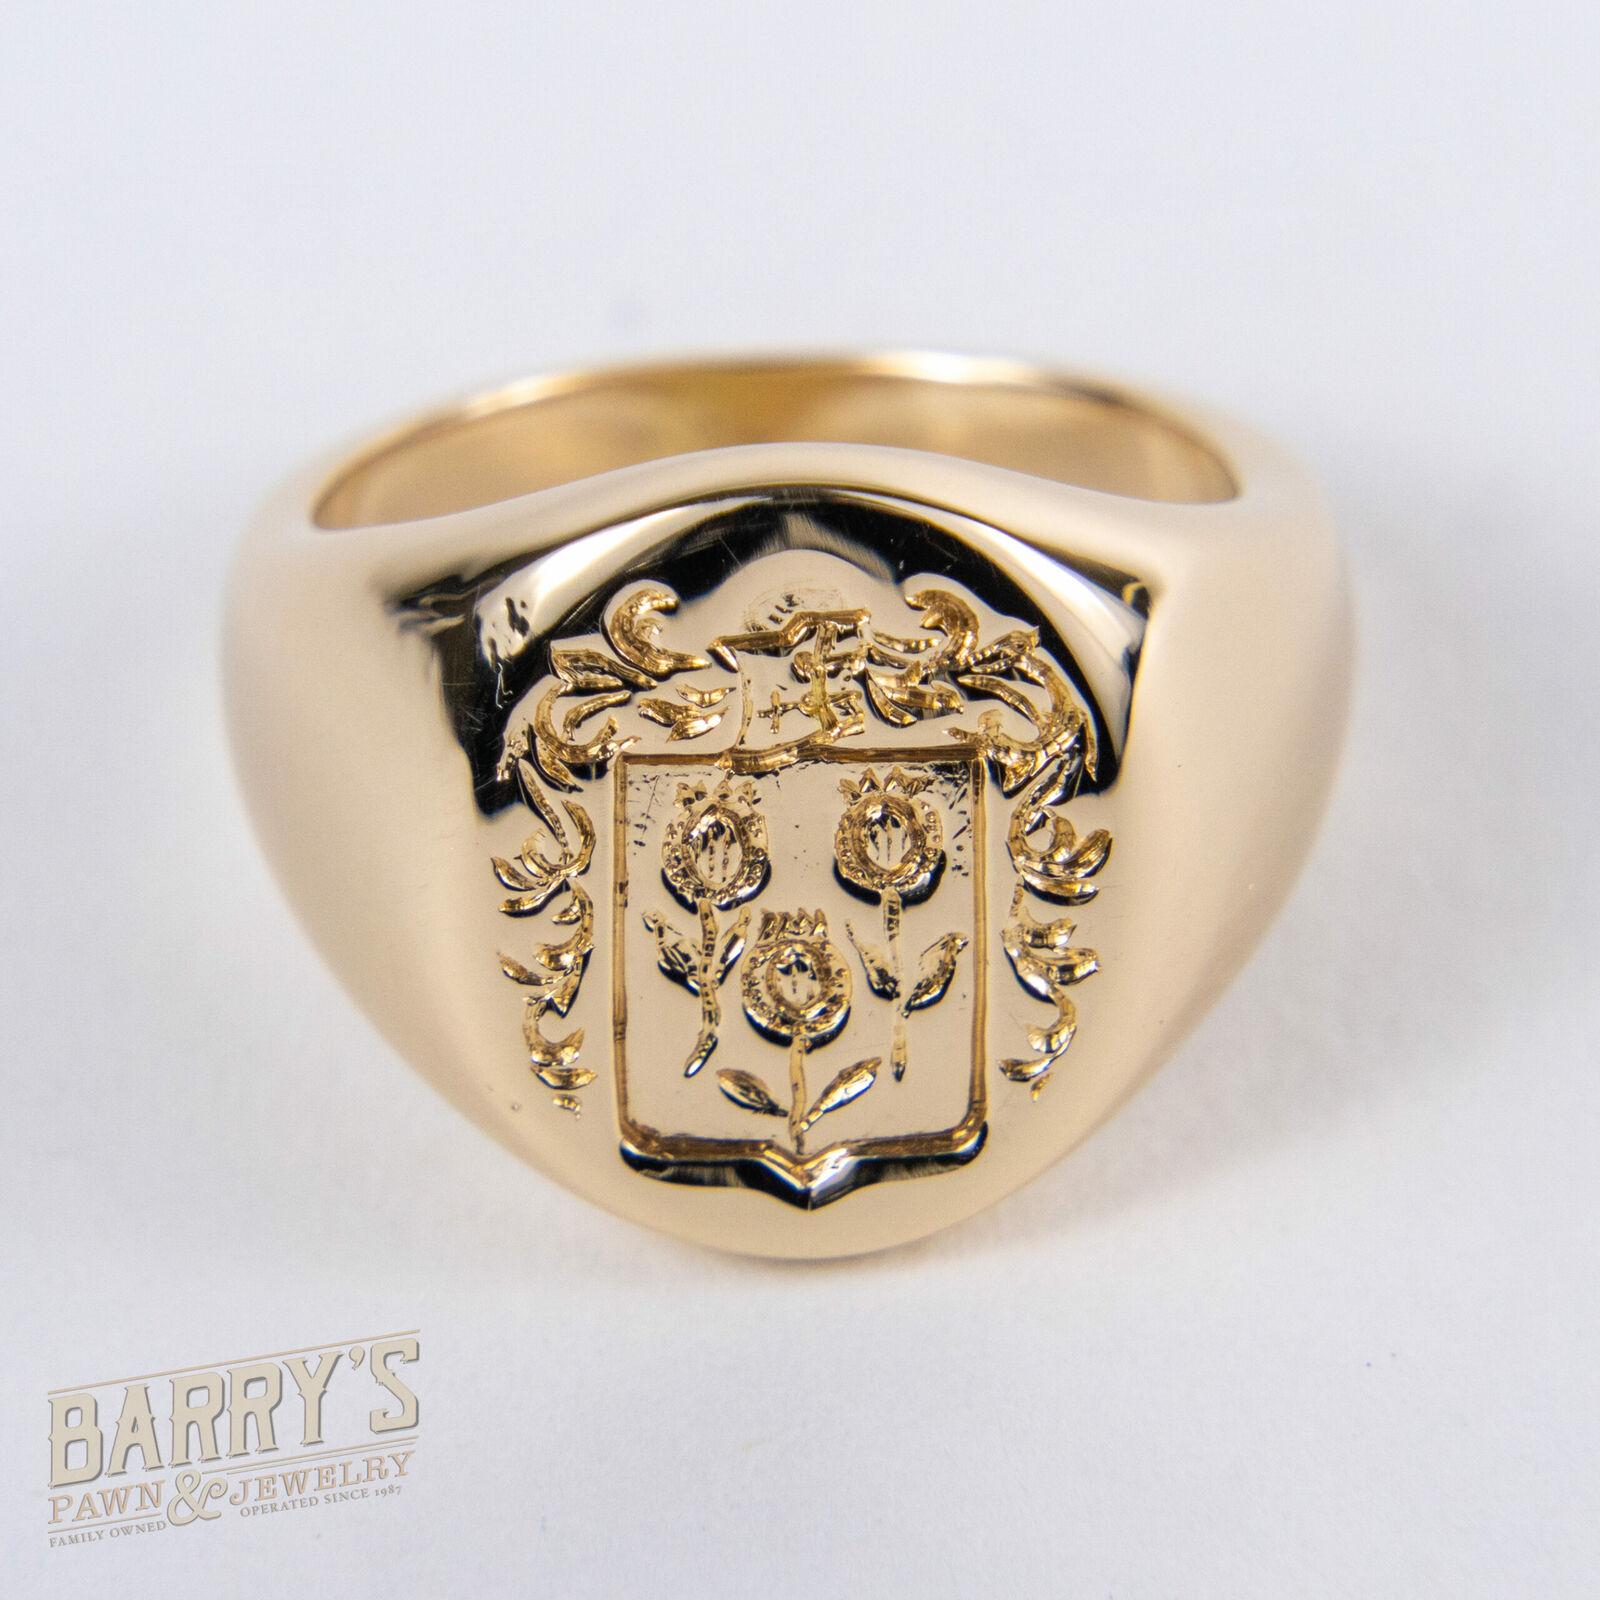 Tiffany & Co. 14k Yellow Gold Crest Signet Ring Roses Motif

Here is your chance to purchase a beautiful and highly collectible designer ring.  Truly a great piece at a great price!  The ring weighs 13.2 grams and is a size 6.5.  The design is from